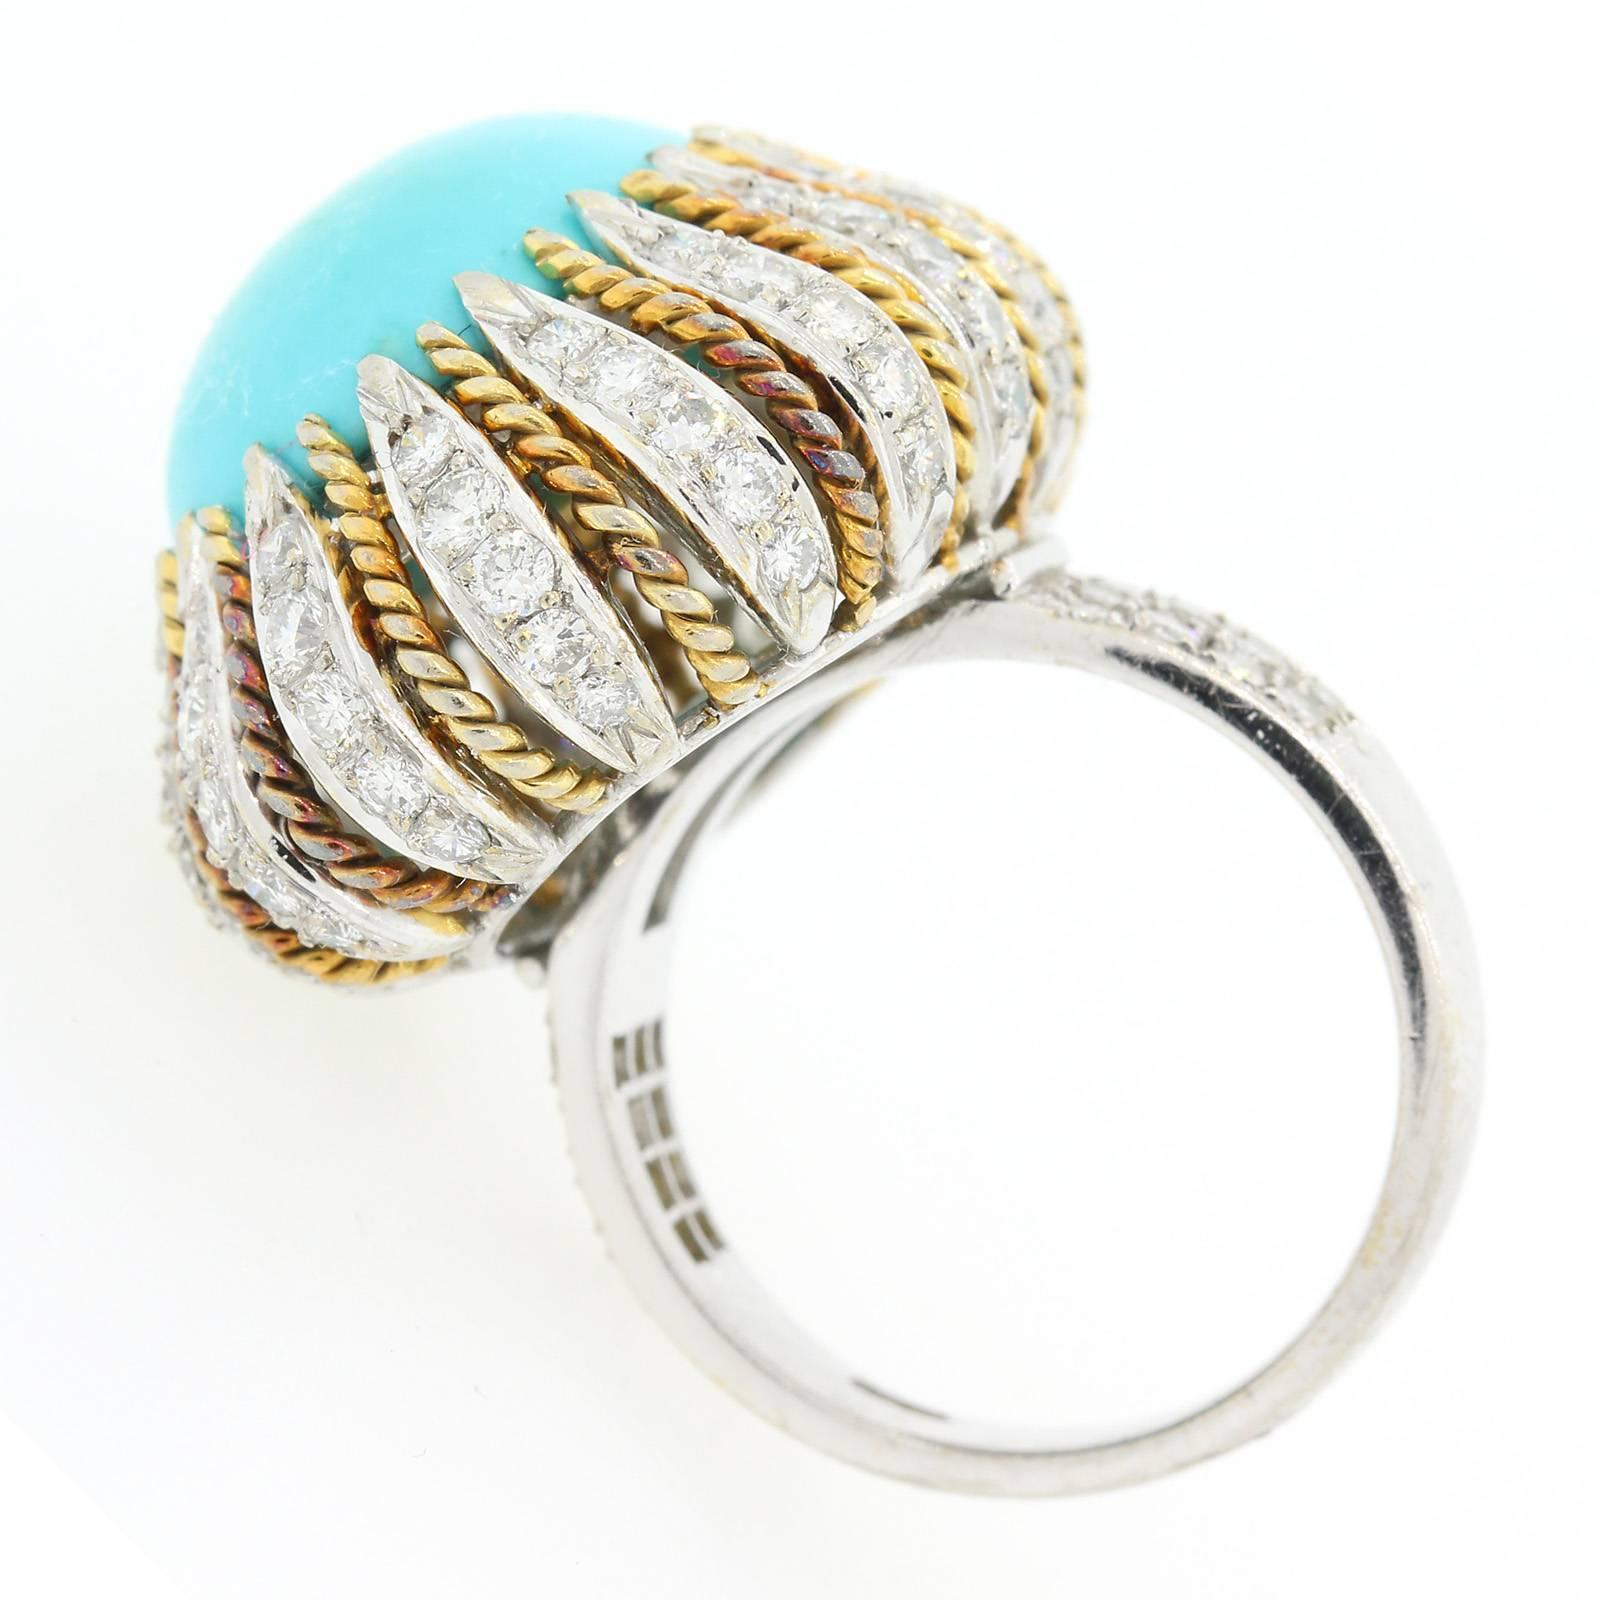 The bombay style ring features a 11.5 carat cabochon cut Turquoise.   The Turquoise is nestled among rising diamond and 18KT white gold flames, alternating with 18KT yellow gold ropes.  The Round Brilliant Cut Diamonds all weigh 2.07 carat, and are